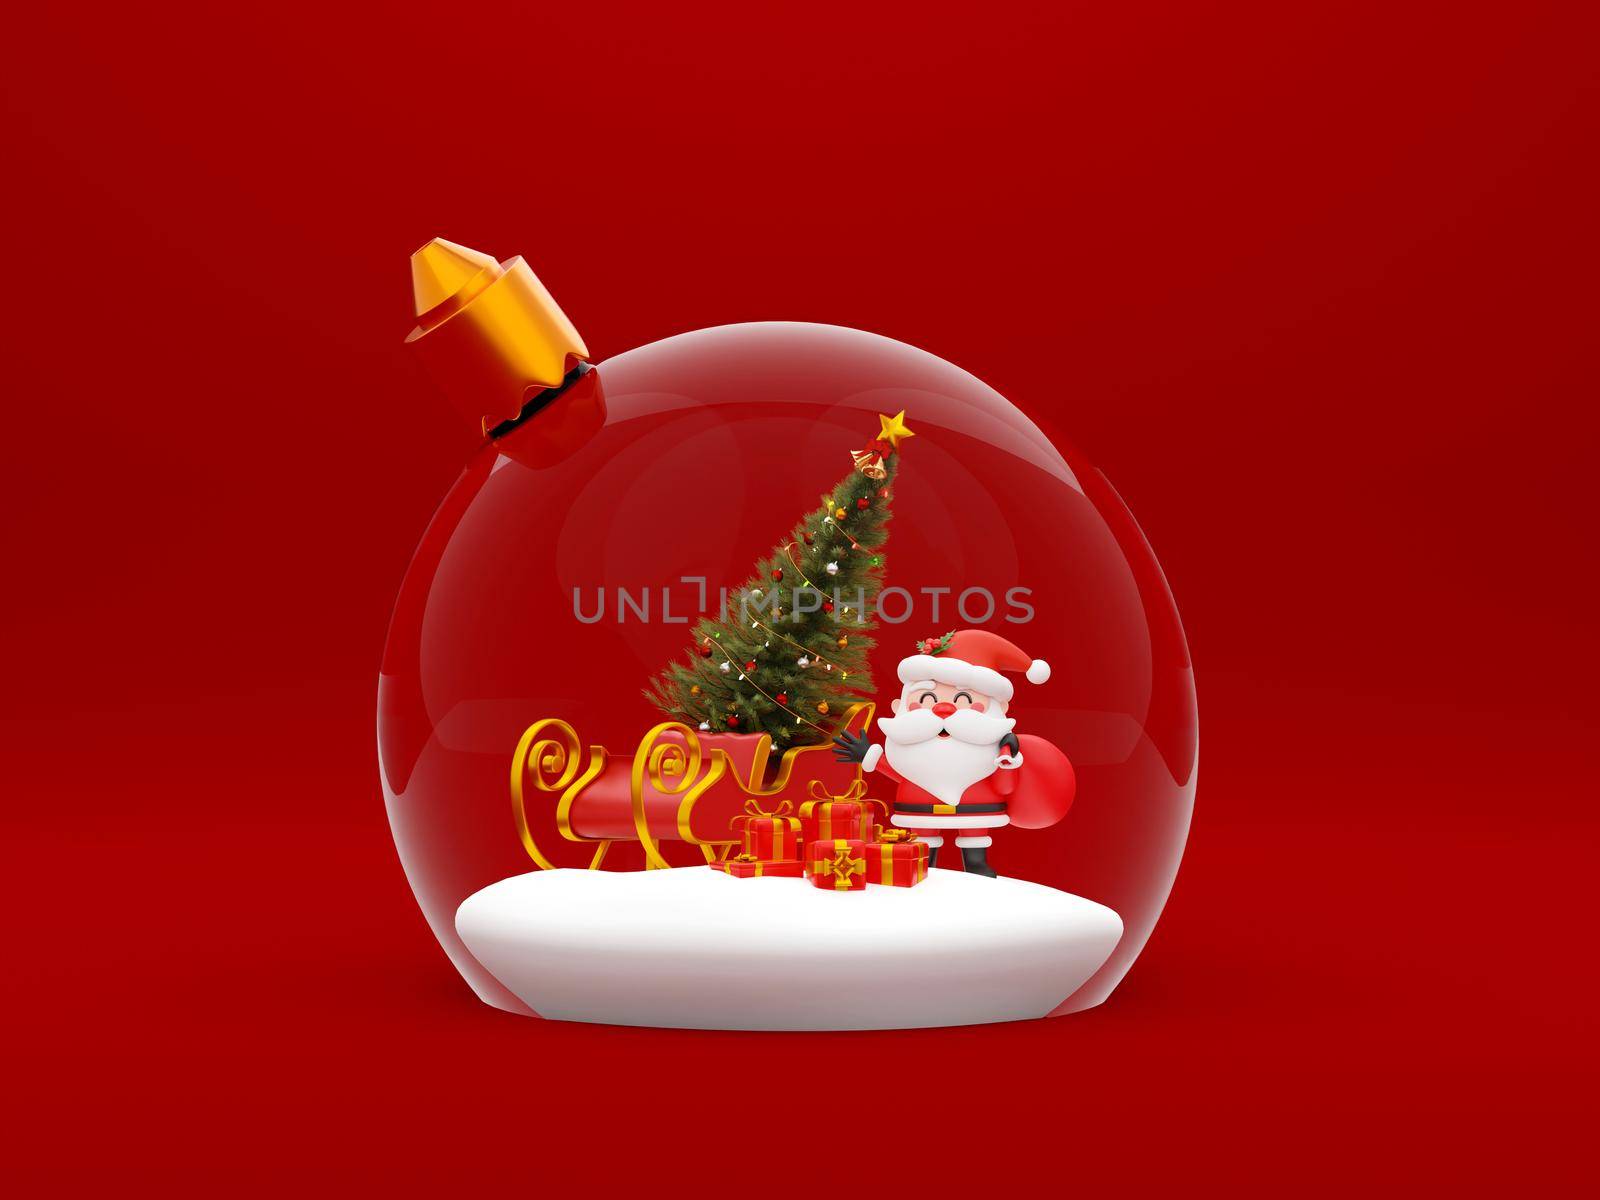 3d illustration of Santa Claus with sleigh in snow globe